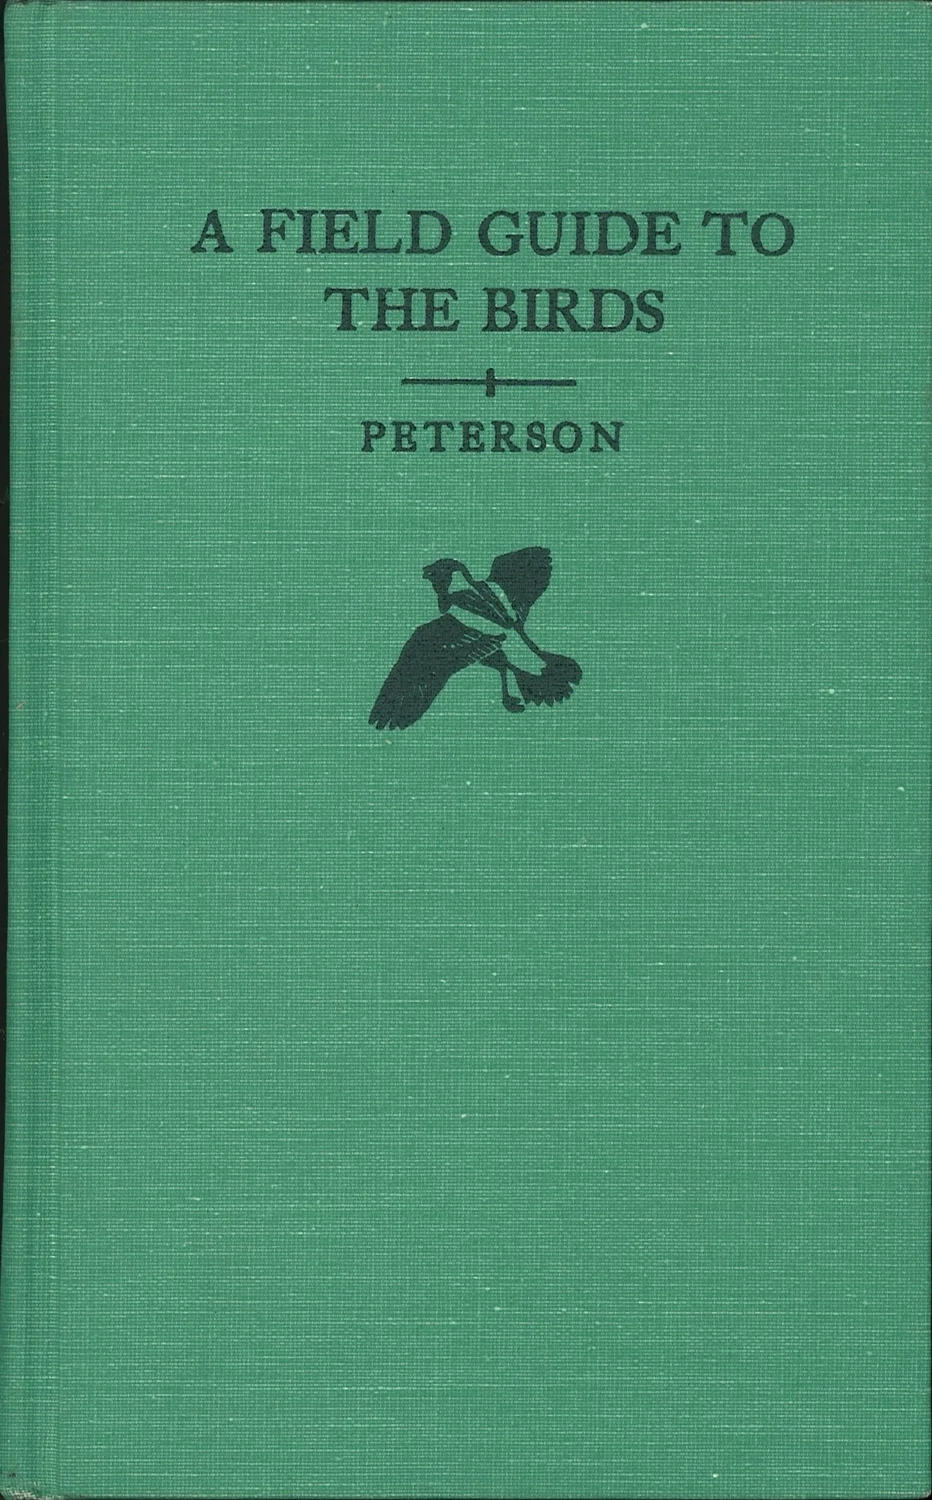 A Field Guide To The Birds by Roger Tory Peterson